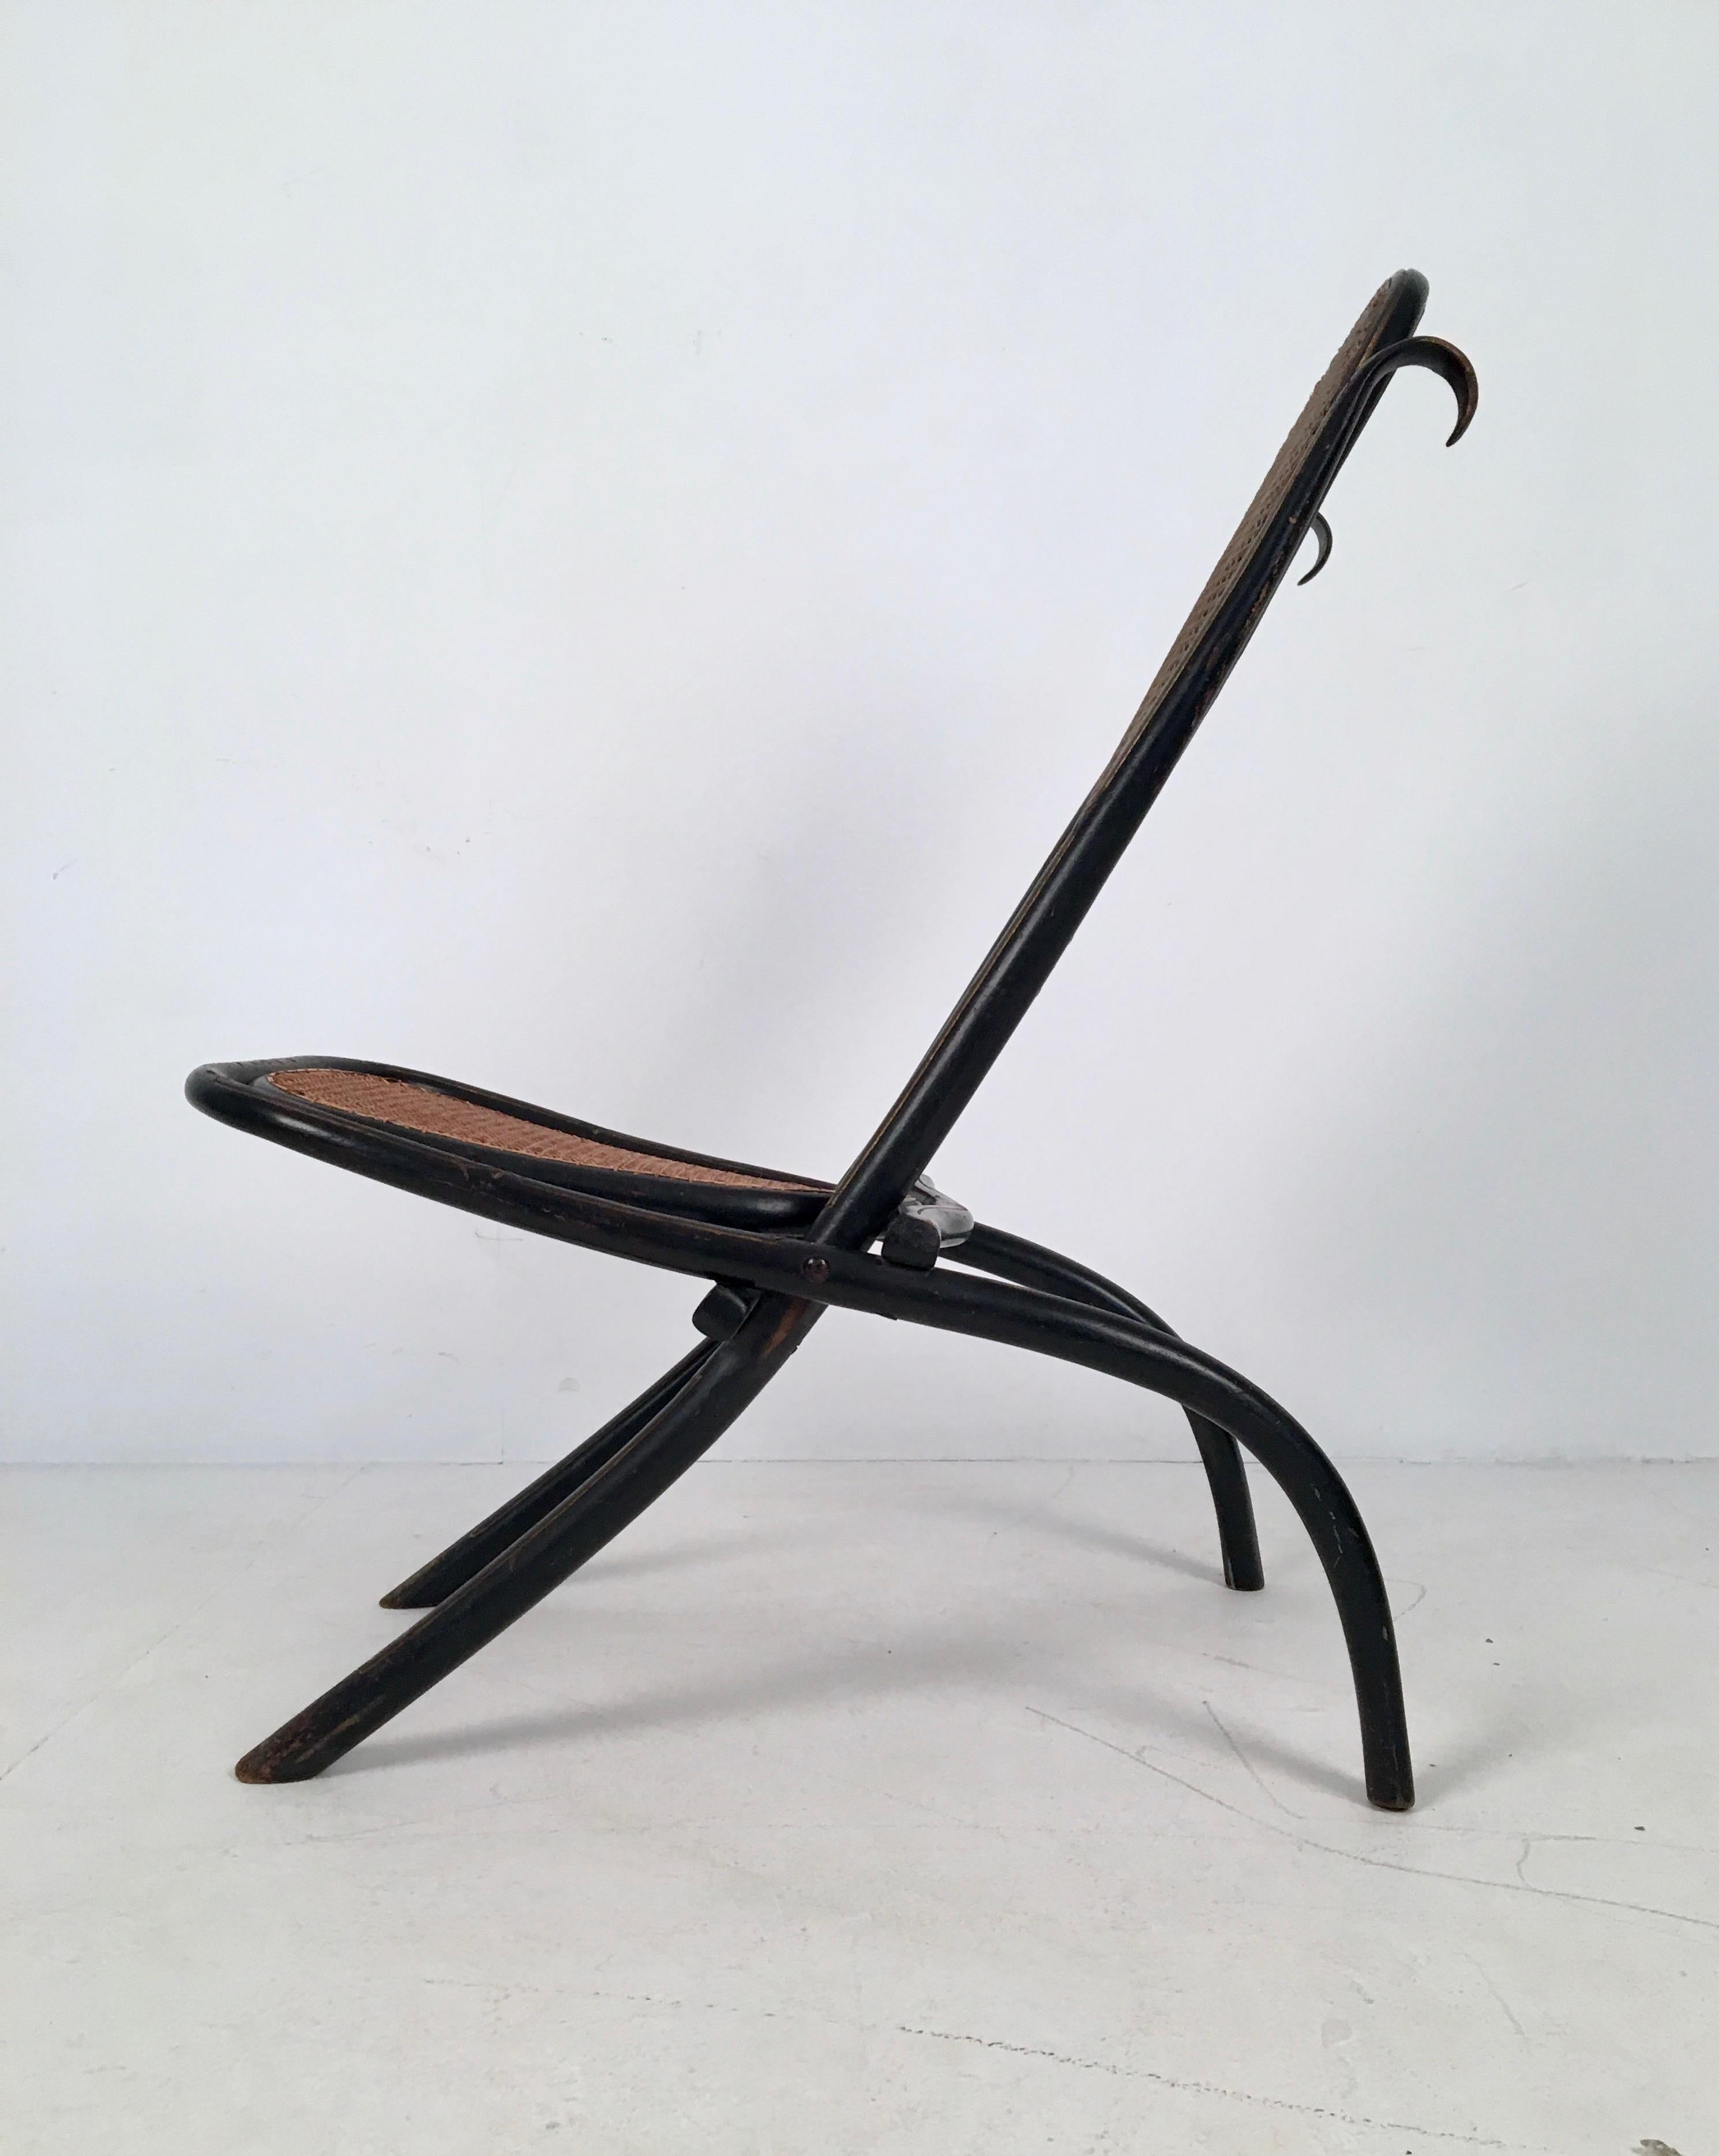 Rare folding bentwood and cane chair from the aesthetic movement, designed by Michael Thonet for Thonet, Austria, circa 1863 and manufactured in the early 20th Century.